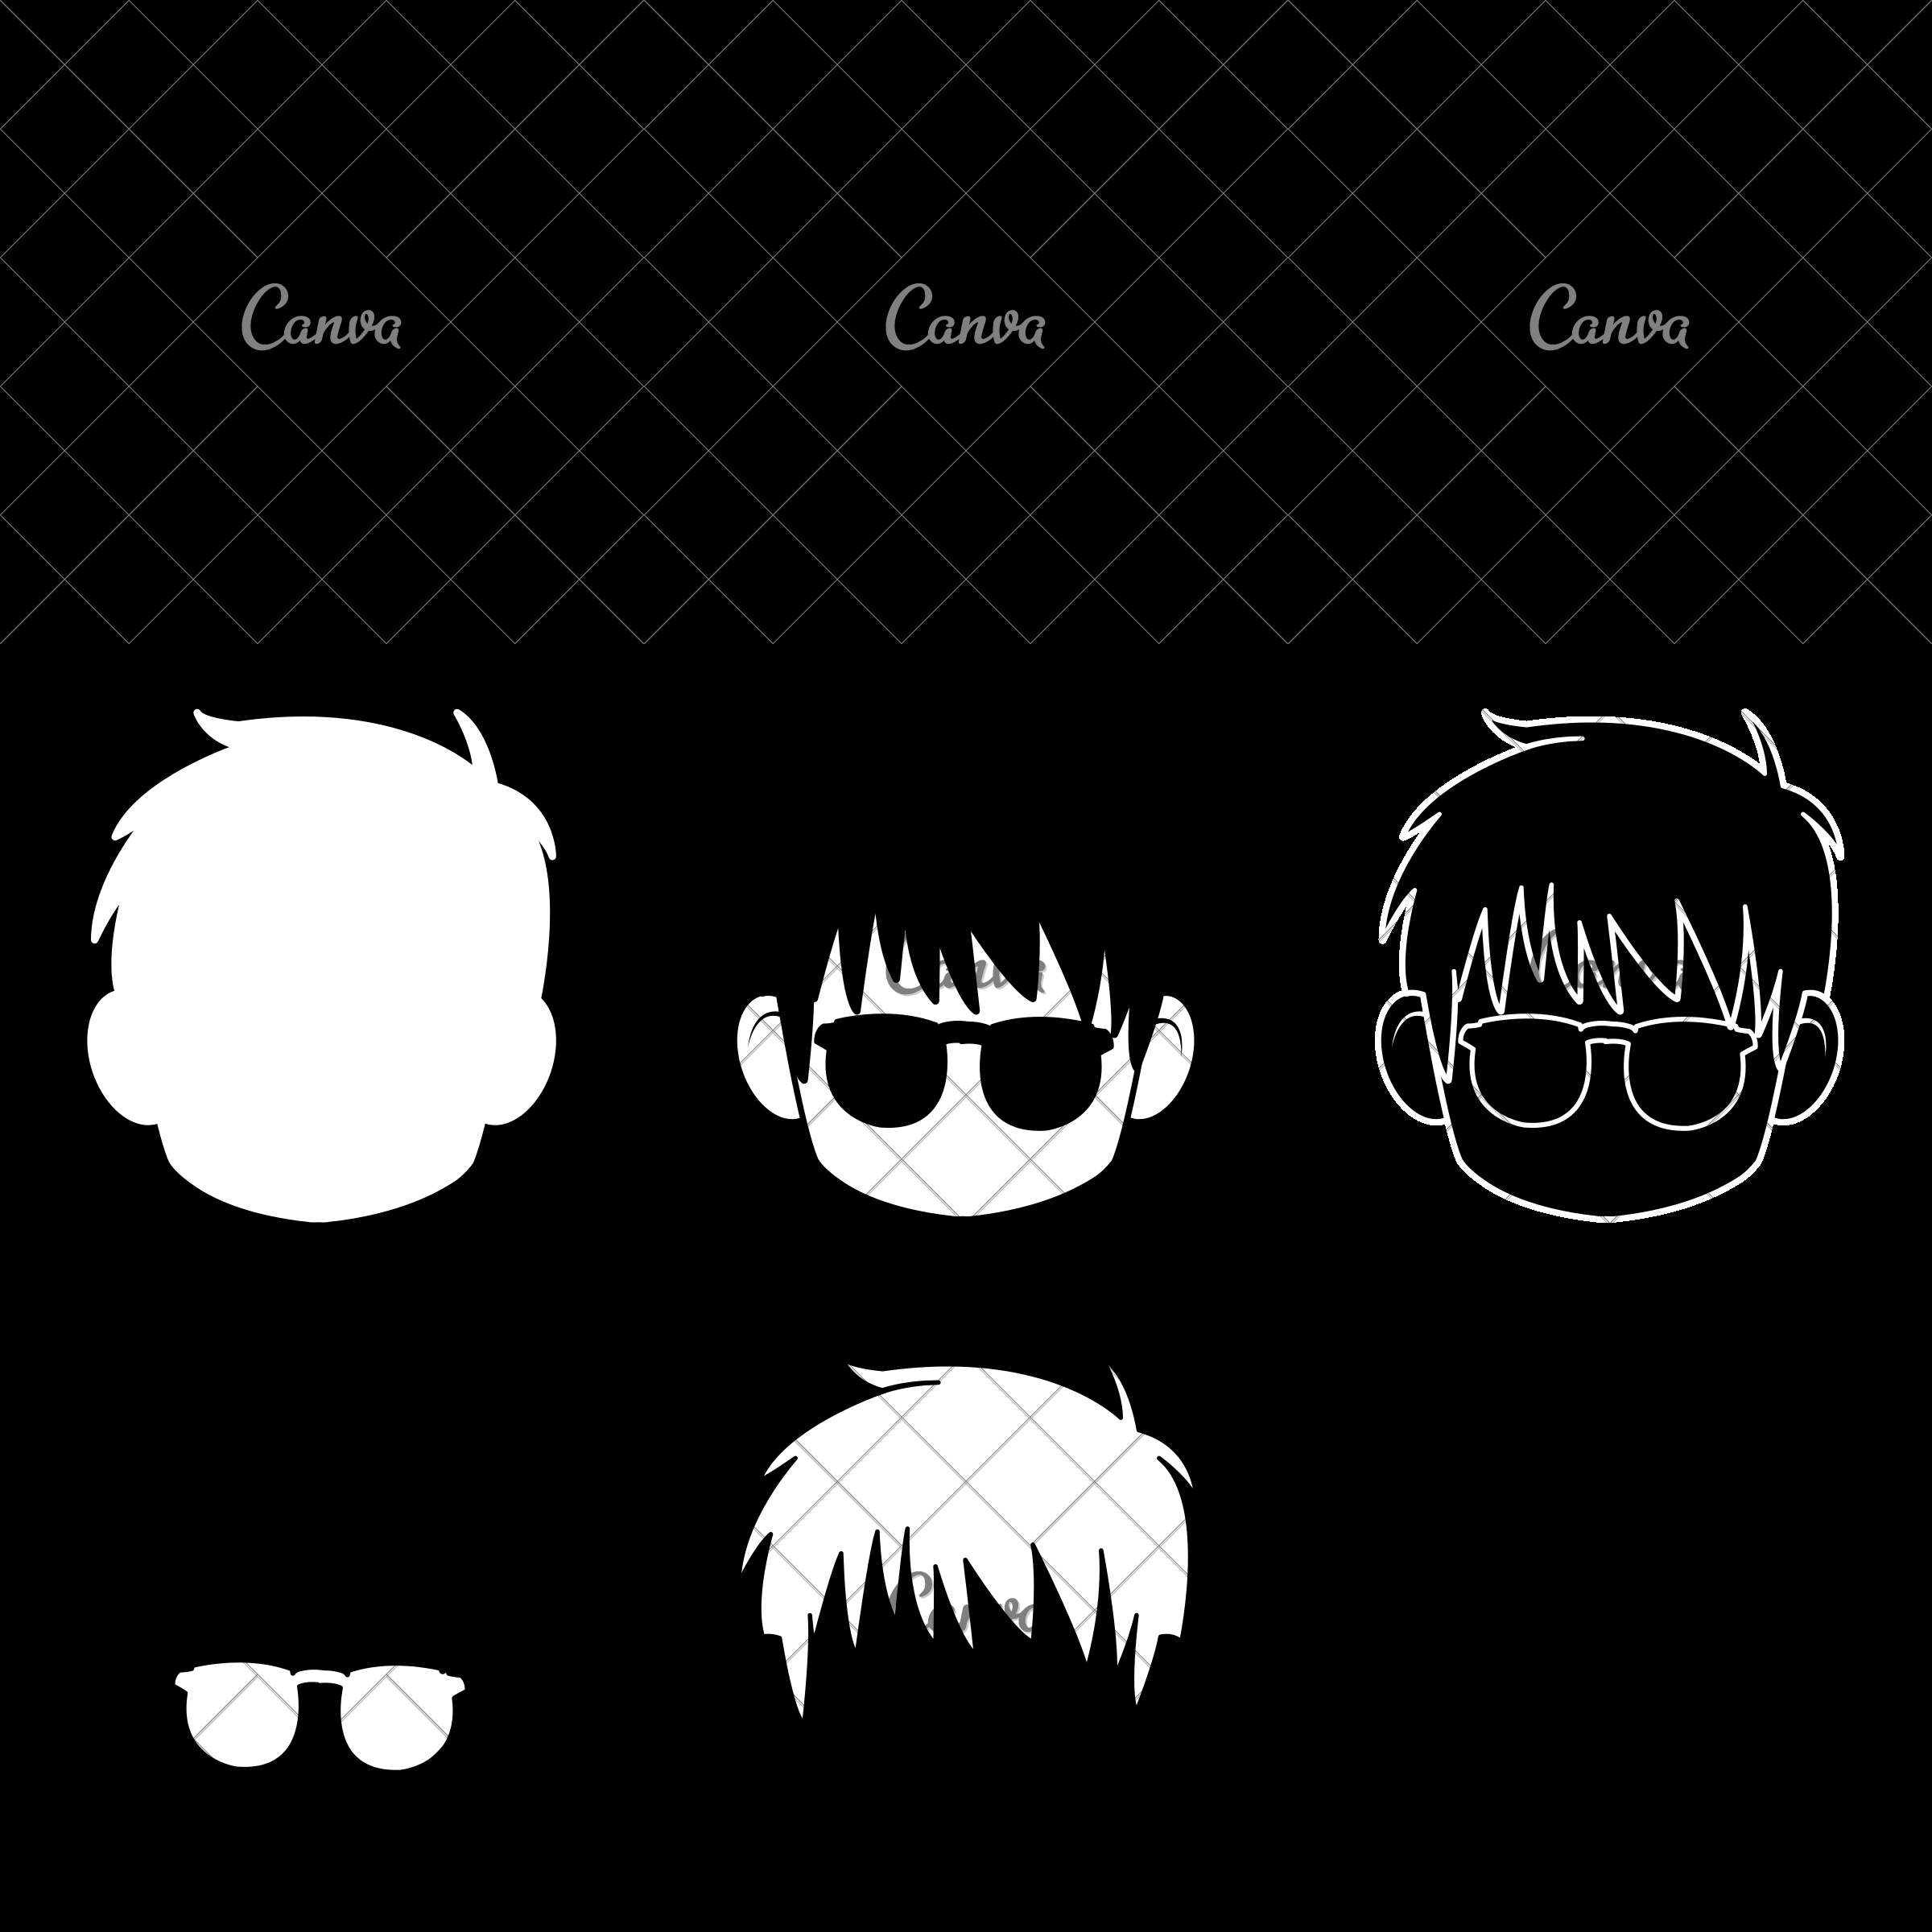 Anime Boy With Blue Hair And Glasses Icons By Canva